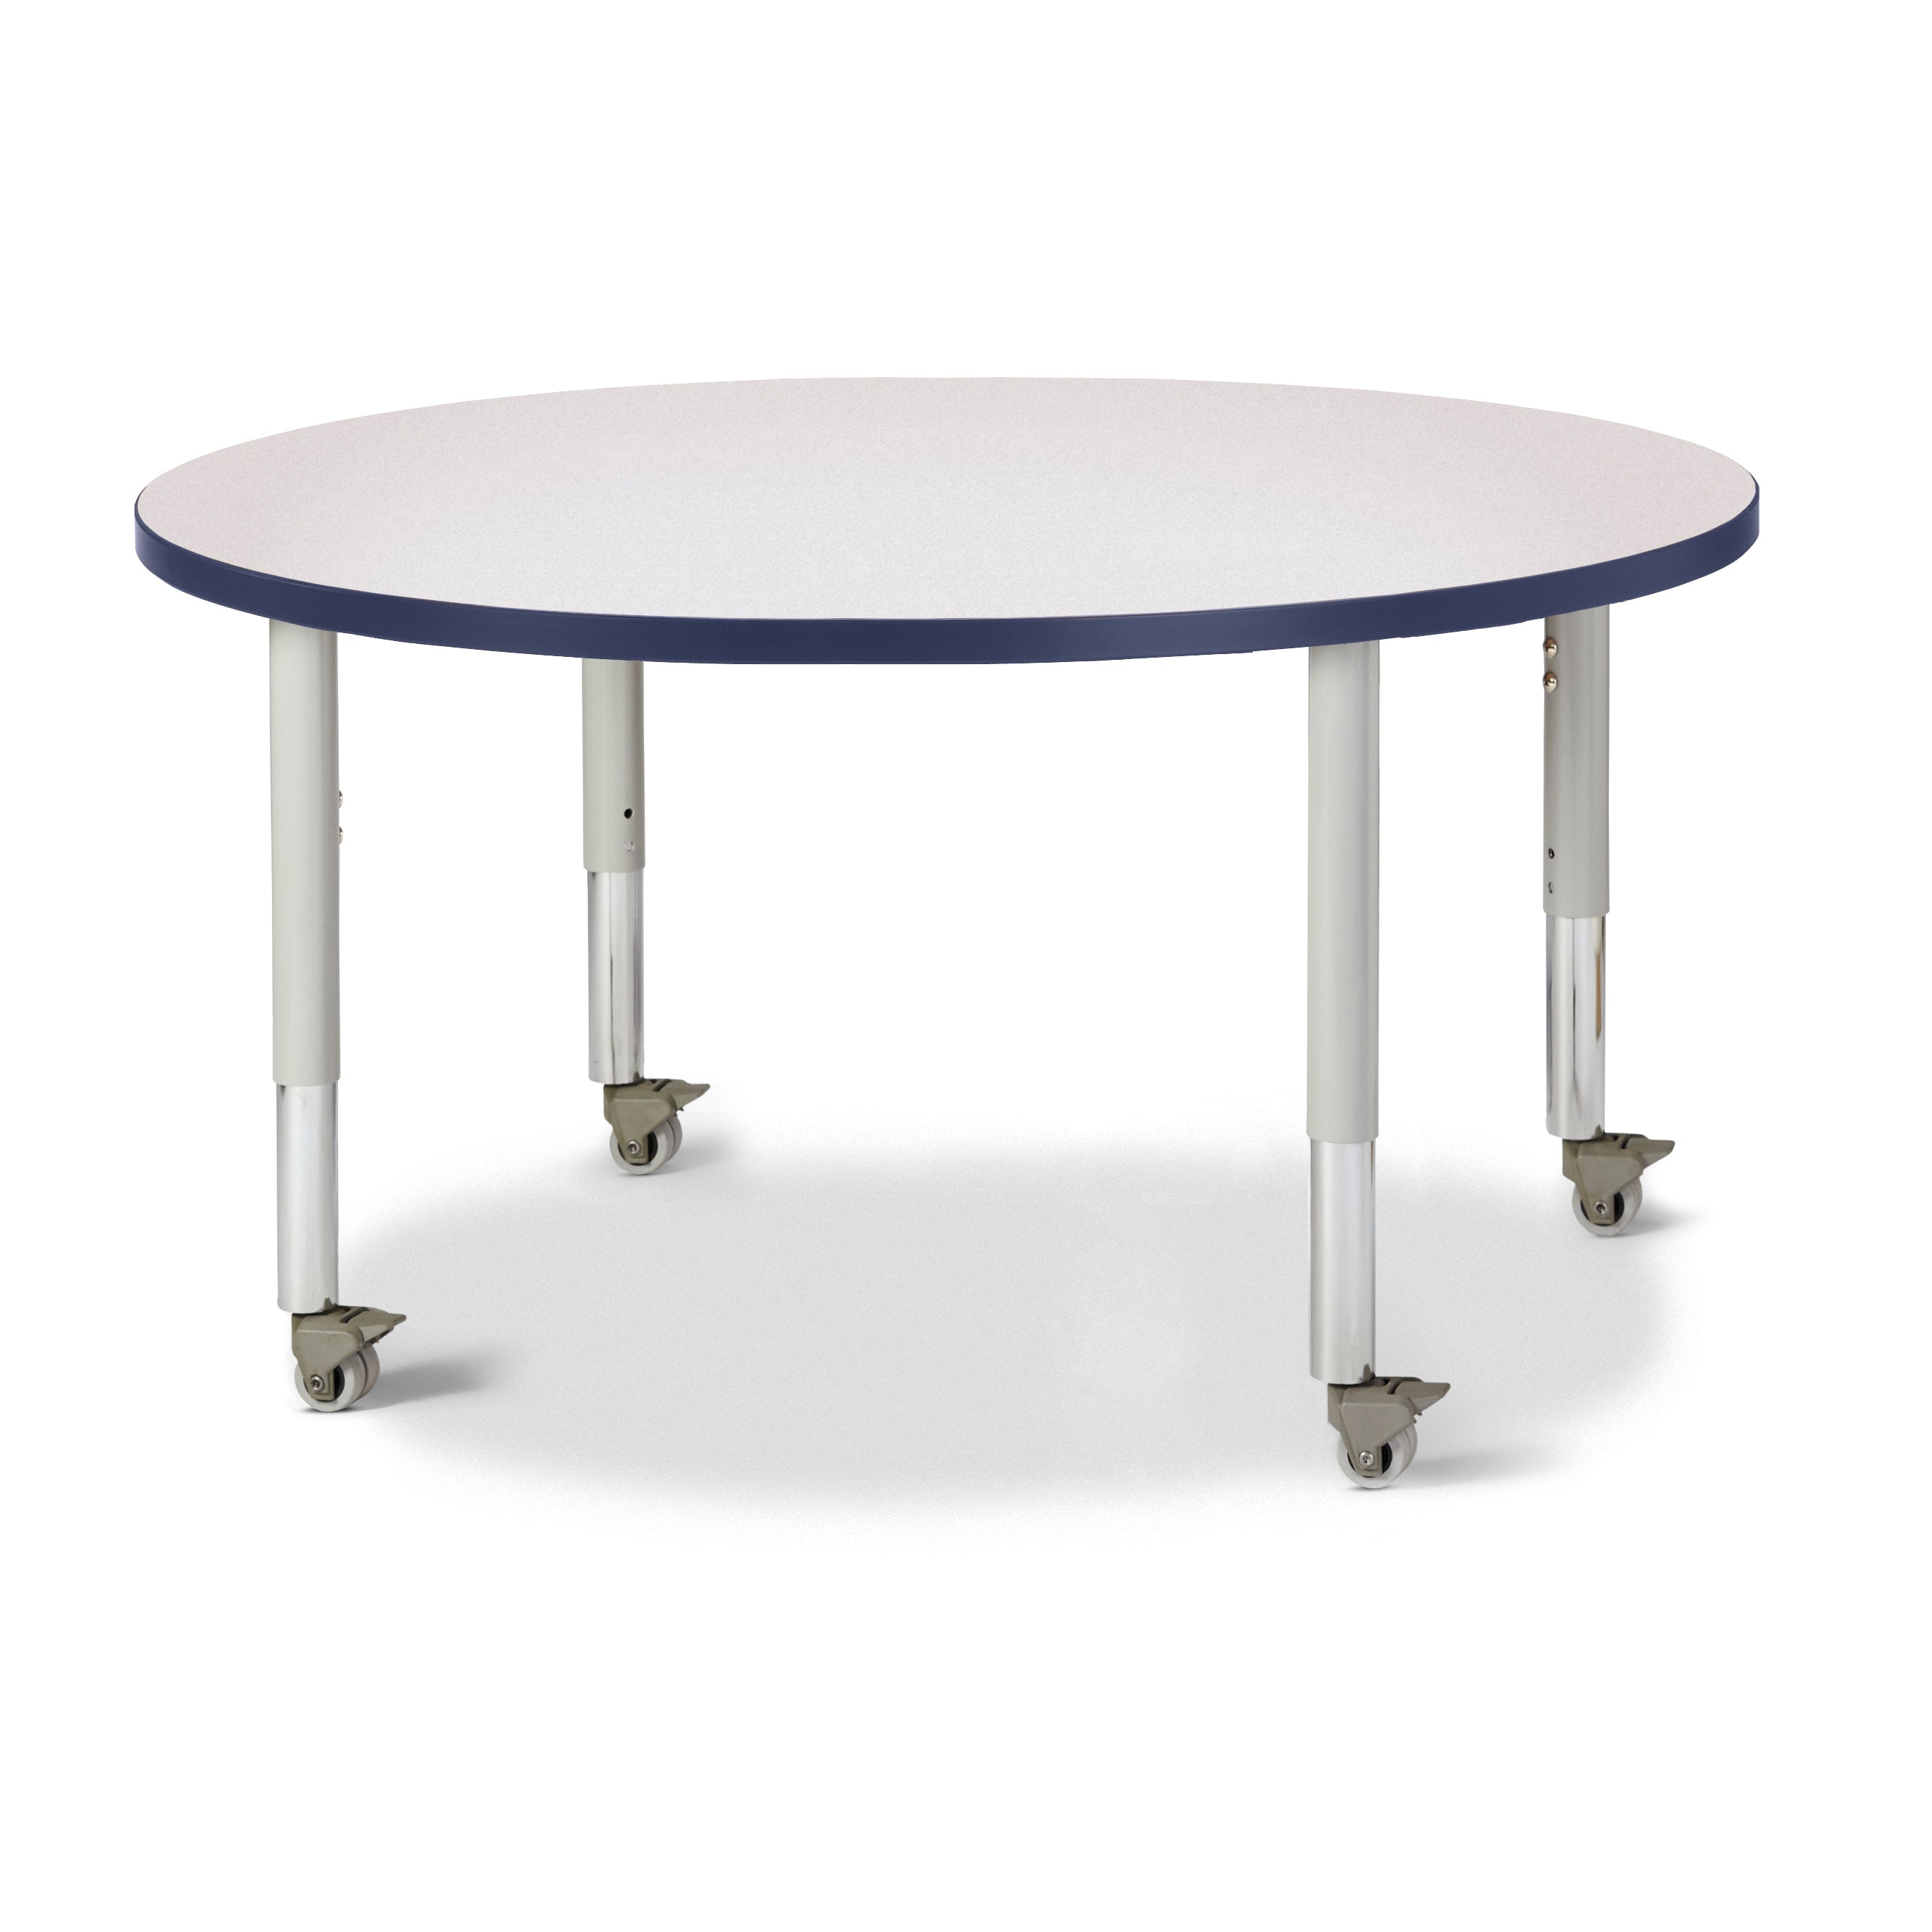 6468JCM112, Berries Round Activity Table - 42" Diameter, Mobile - Freckled Gray/Navy/Gray